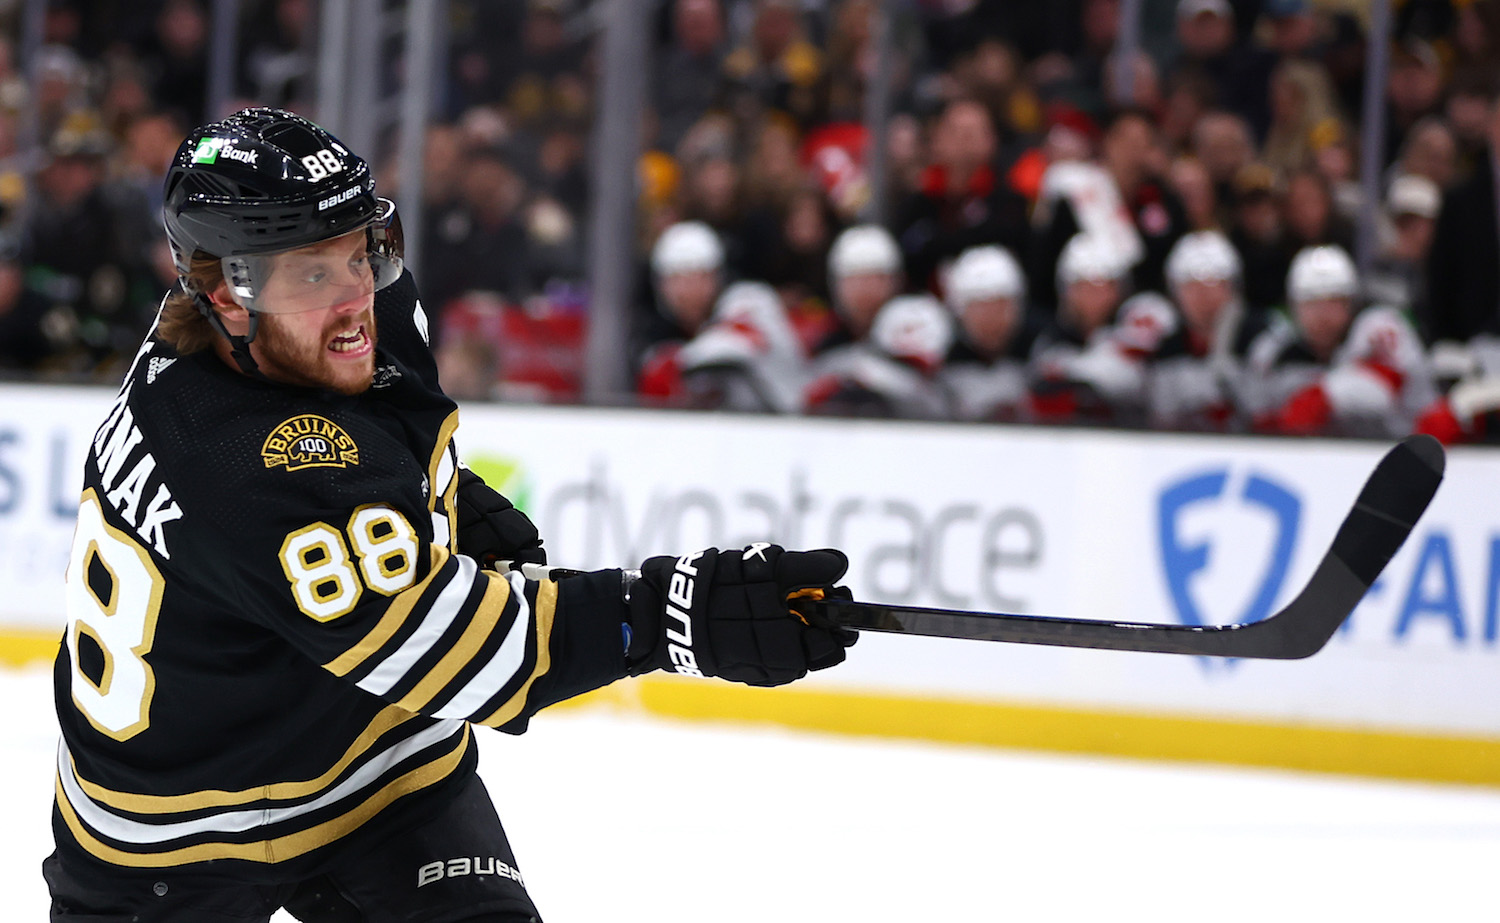 BOSTON, MASSACHUSETTS - JANUARY 15: David Pastrnak #88 of the Boston Bruins takes a shot against the New Jersey Devils during the first period at TD Garden on January 15, 2024 in Boston, Massachusetts. (Photo by Maddie Meyer/Getty Images)